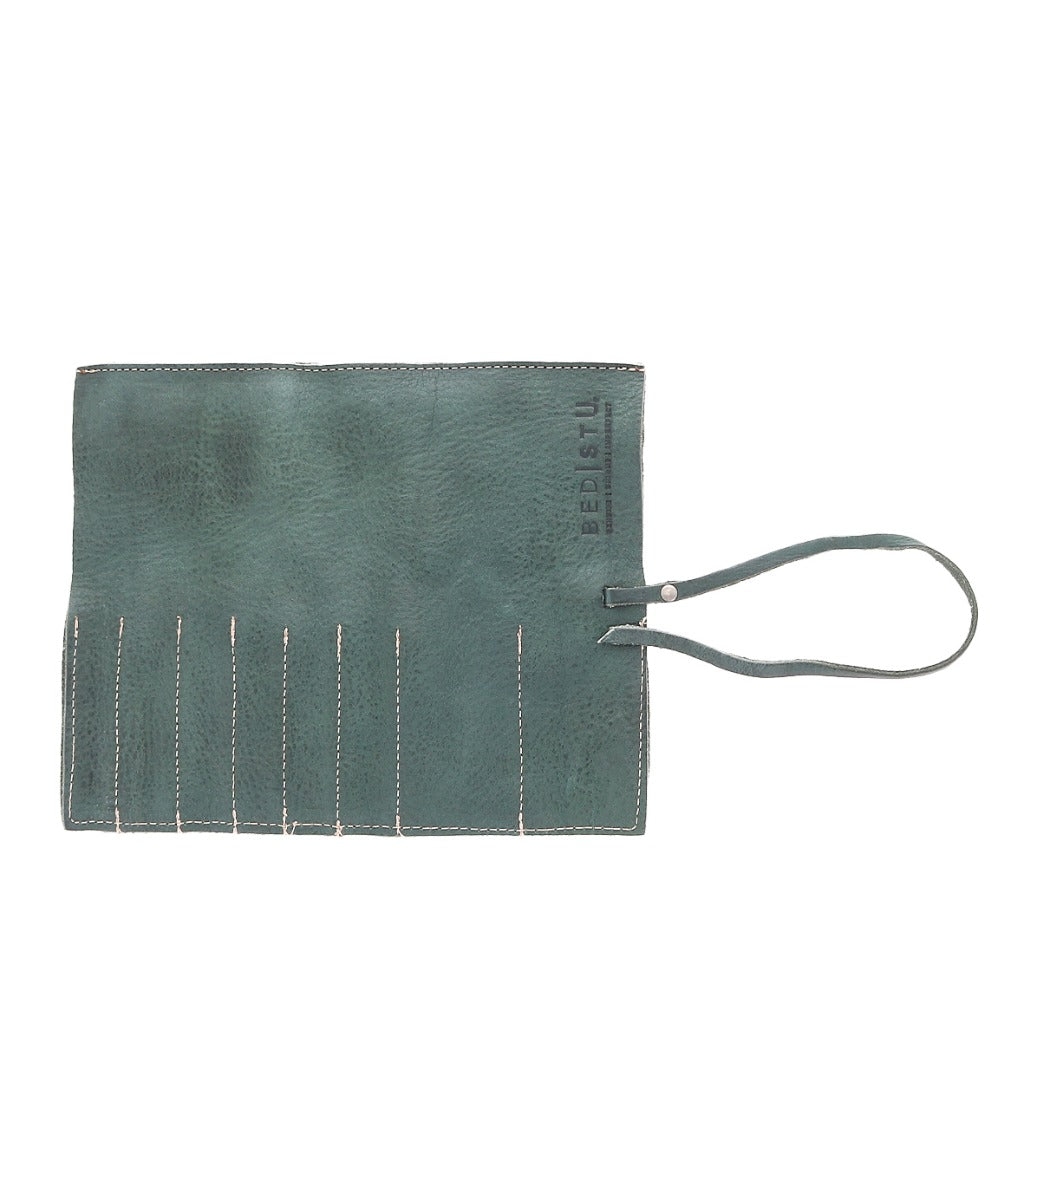 A Prepped green leather wallet with a zipper by Bed Stu.